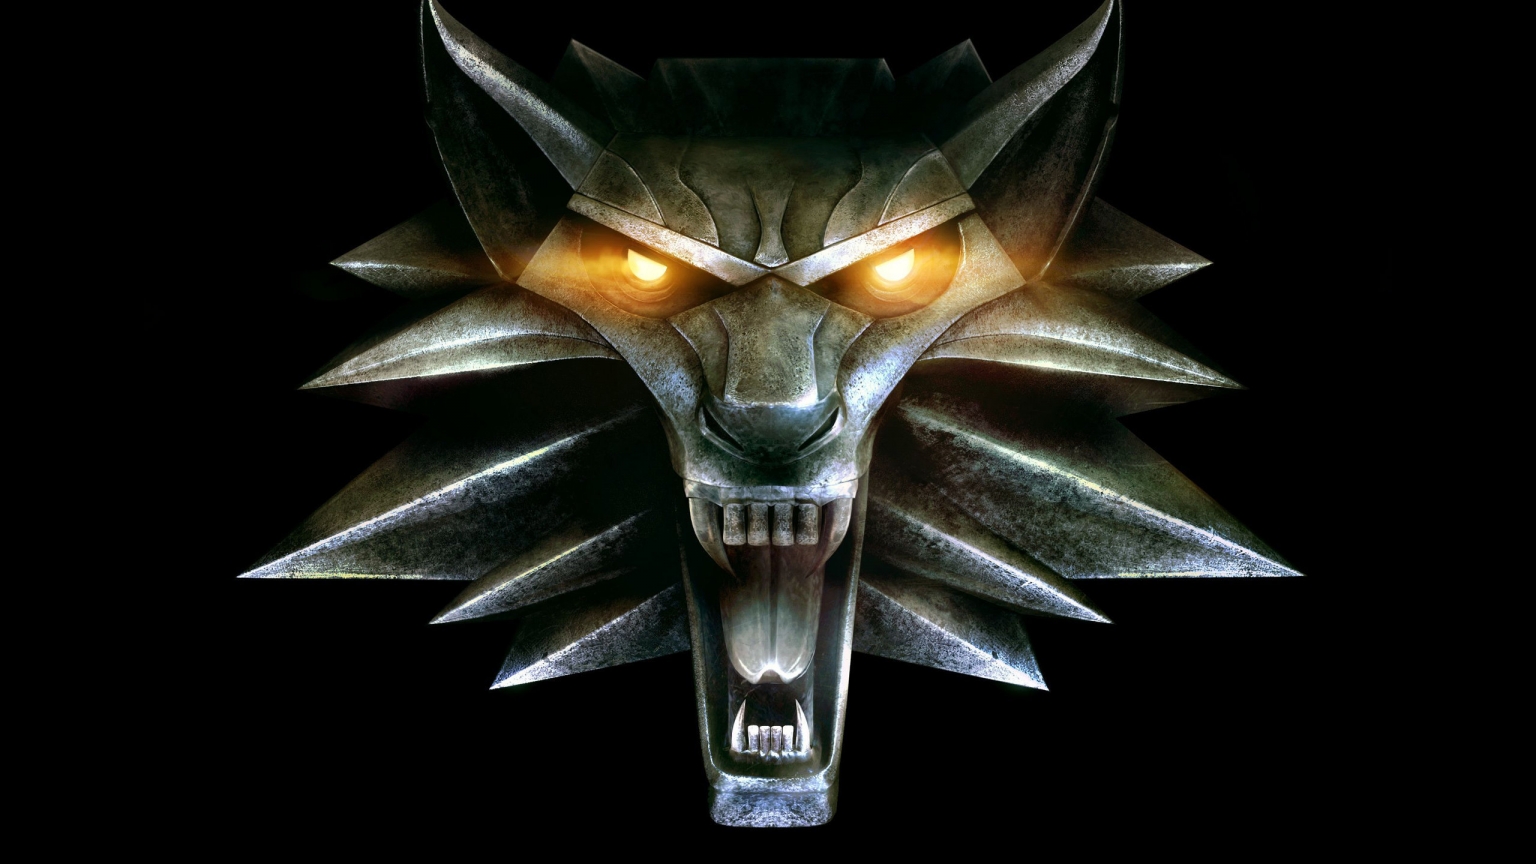 Iron head Wolf for 1536 x 864 HDTV resolution